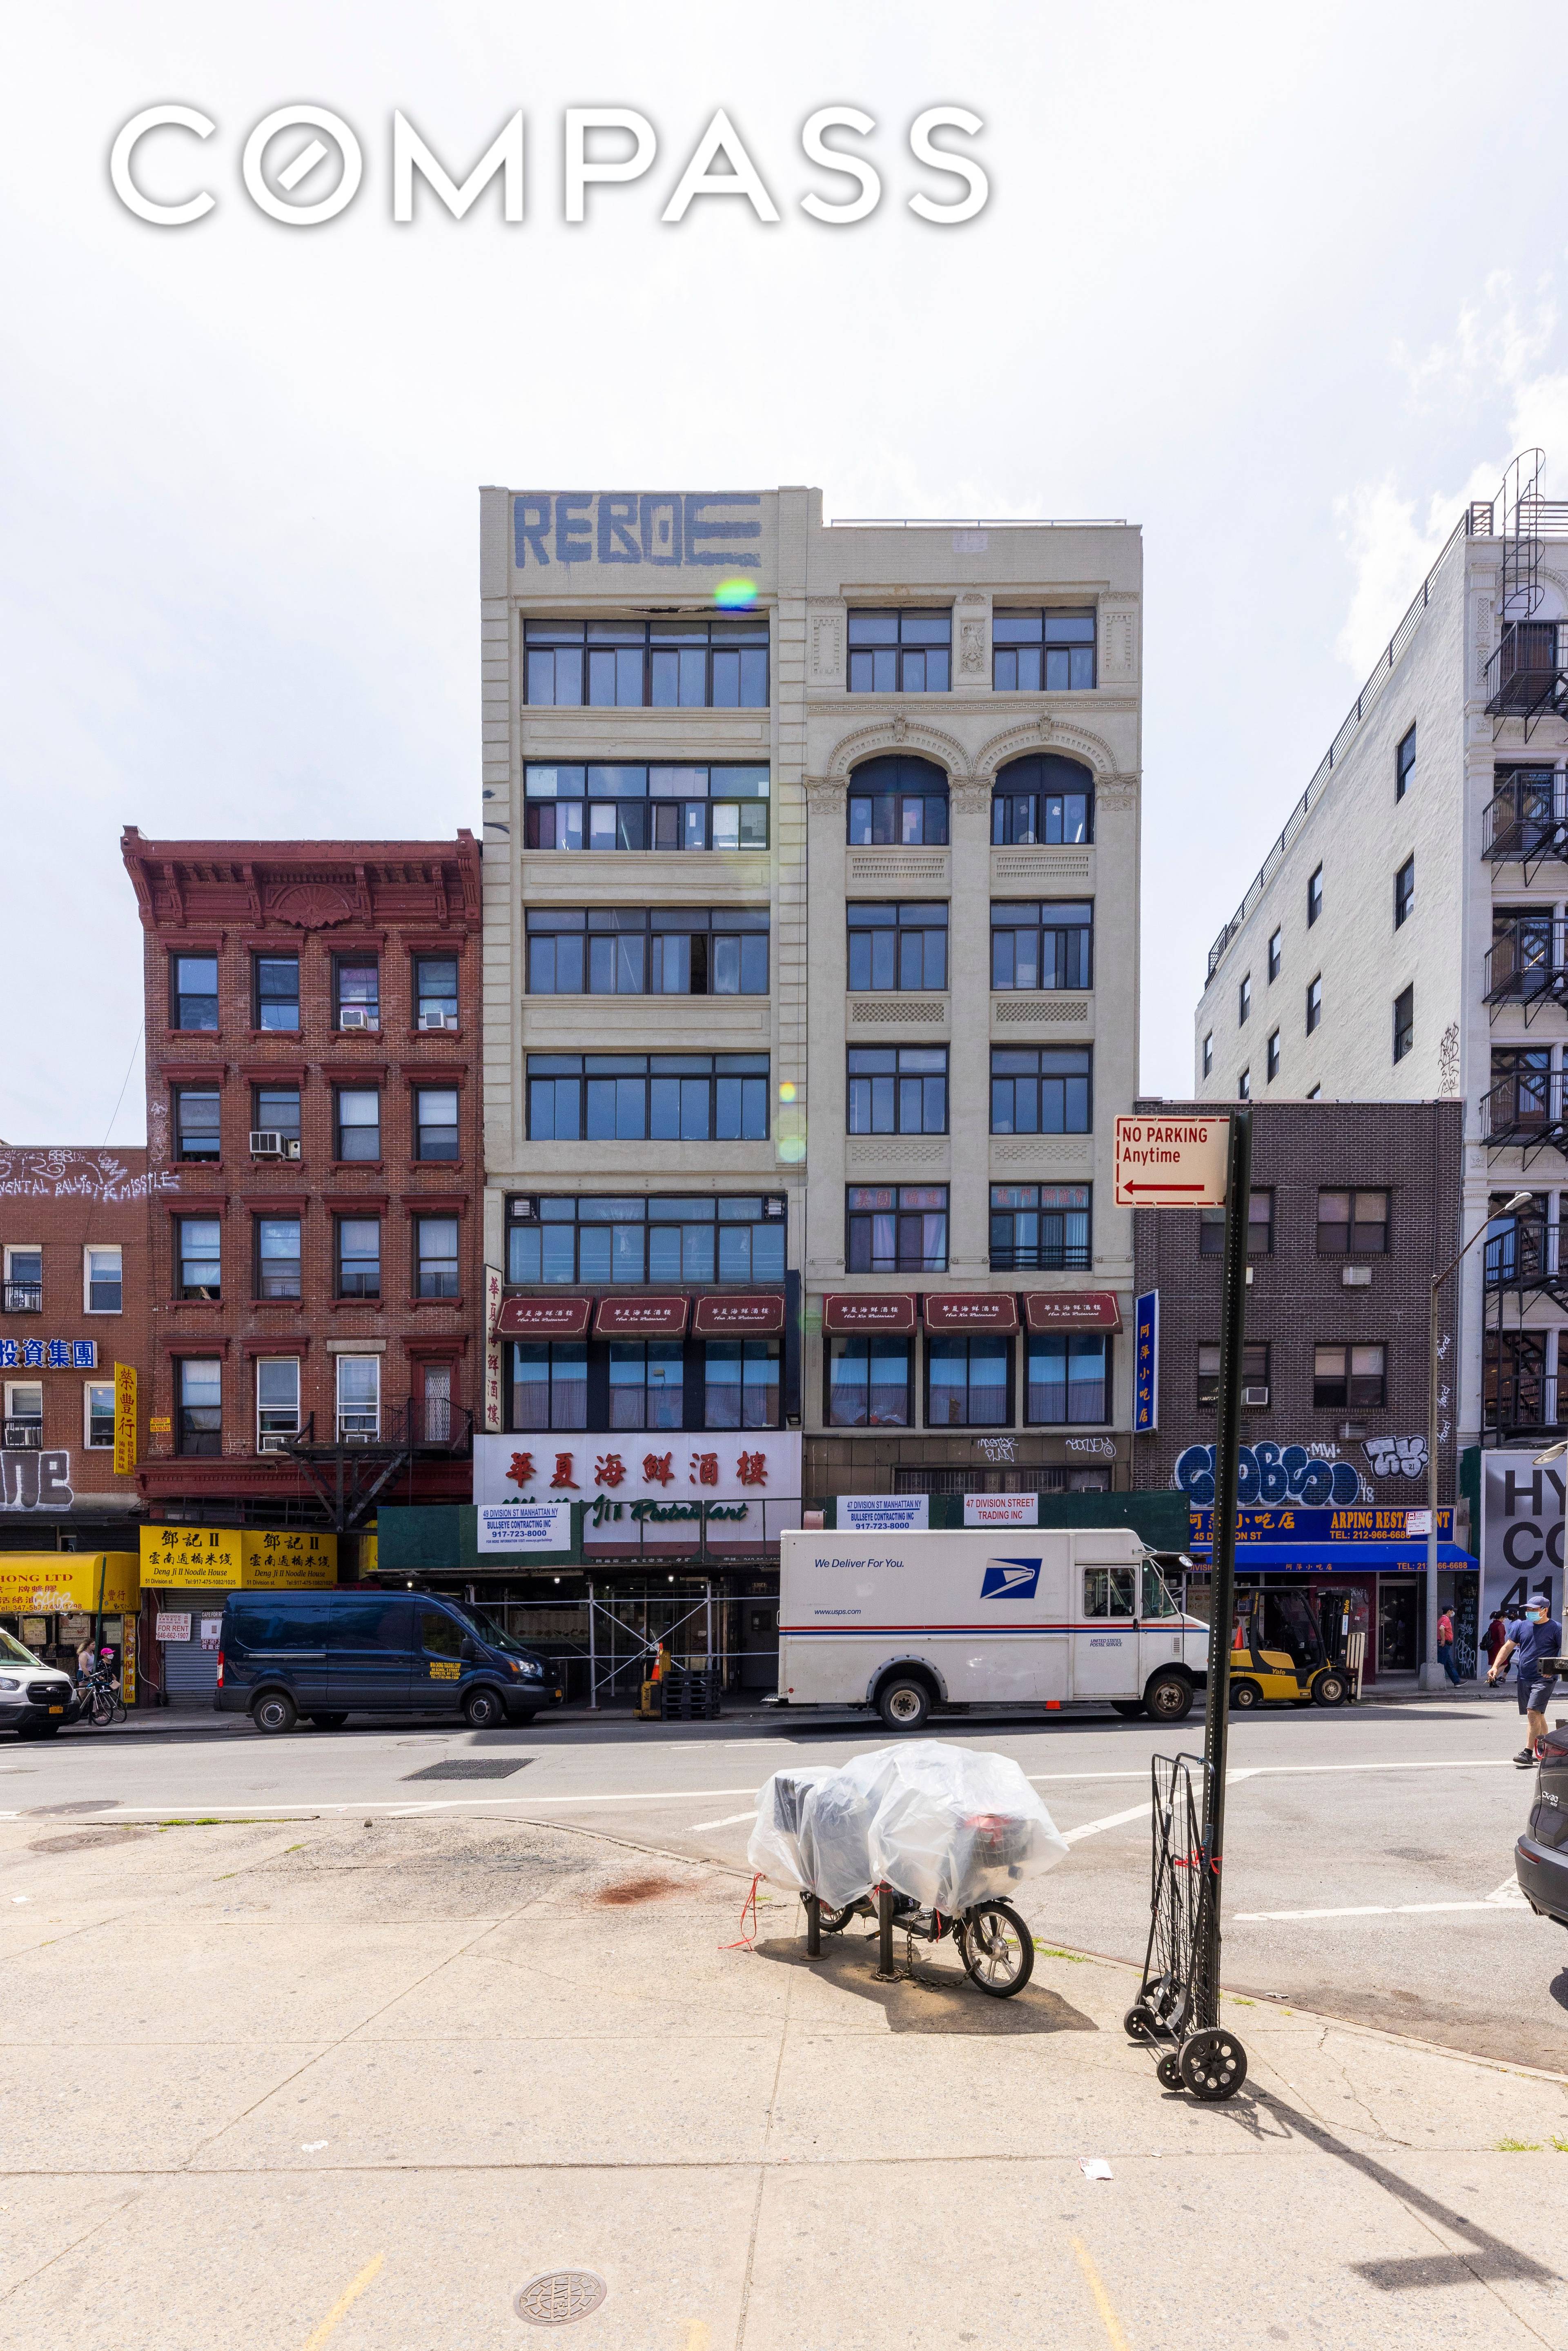 This iconic building can be seen from the Brooklyn bound side of the Manhattan Bridge Located in Business Improvement District Chinatown Partnership 47 49 Division Street 2 tax lots Between ...